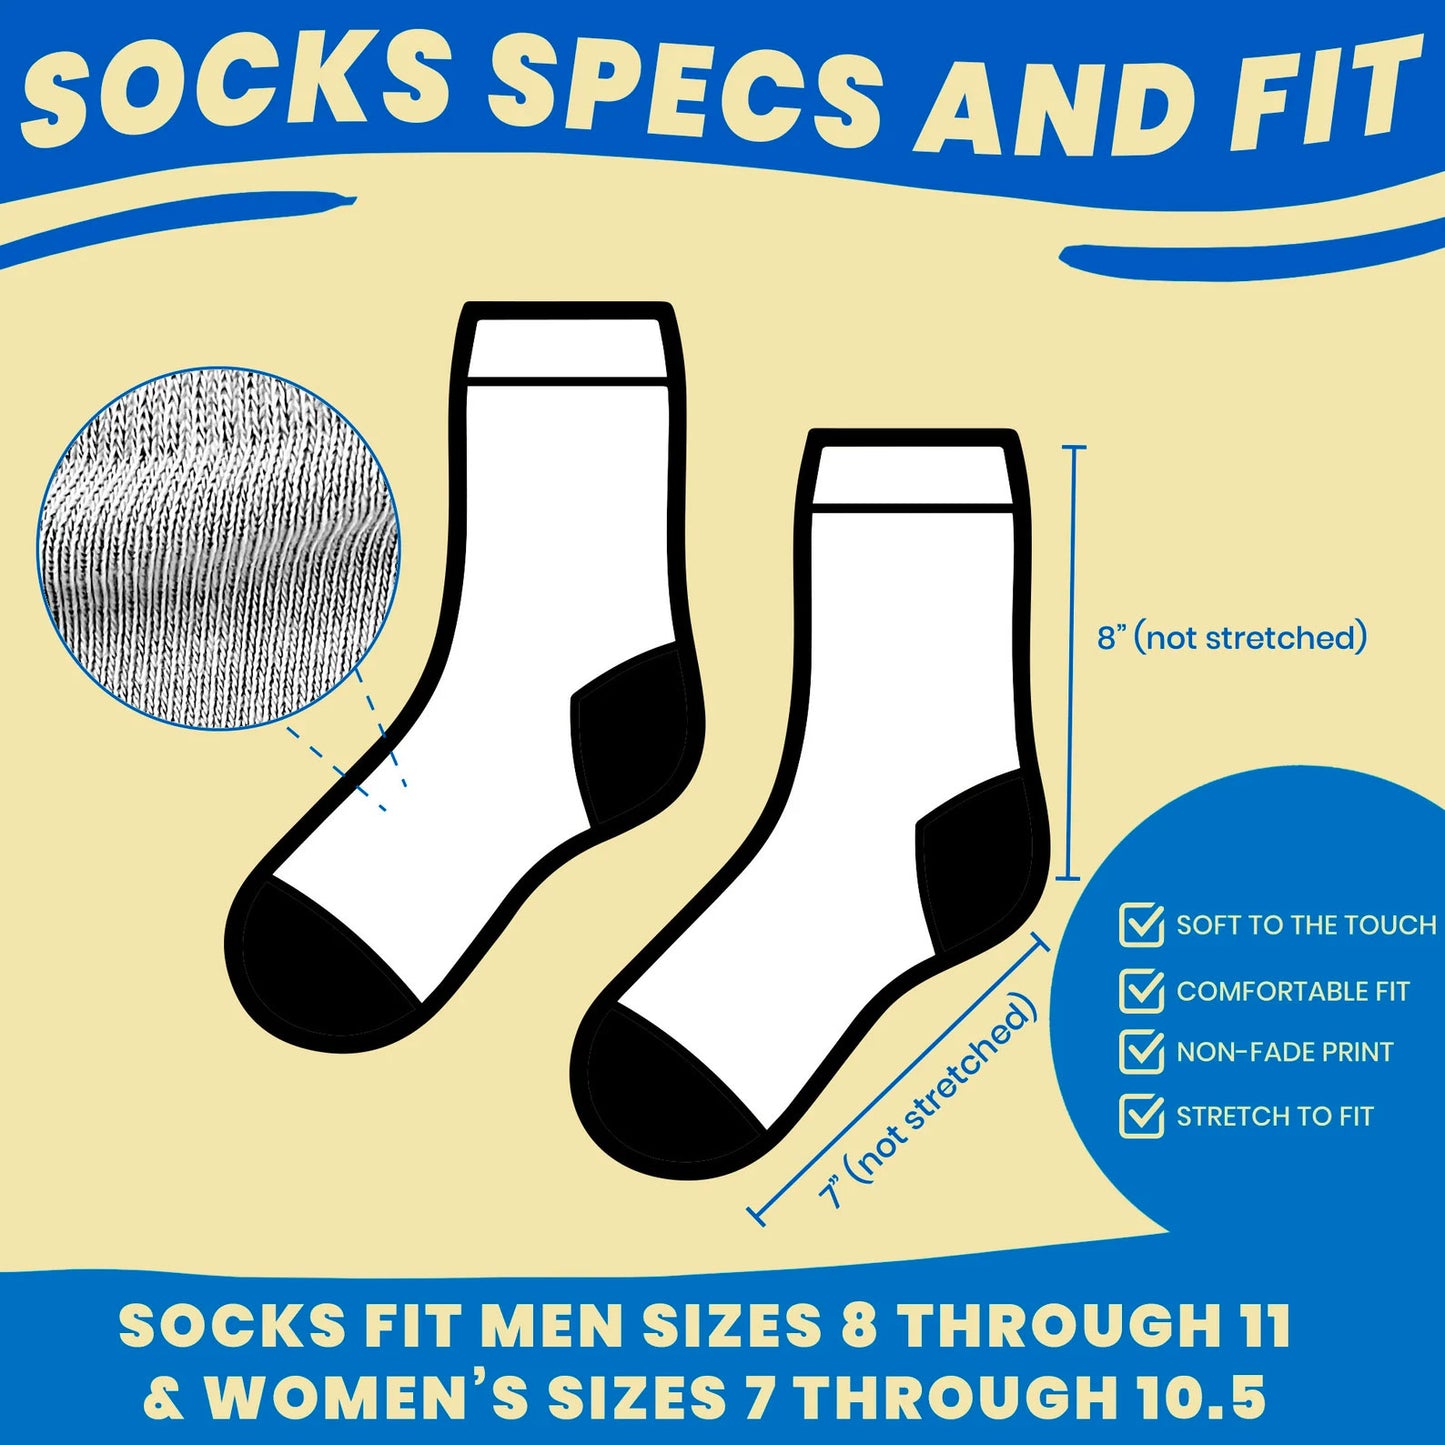 team building personalized gifts socks with faces sock specs and fit